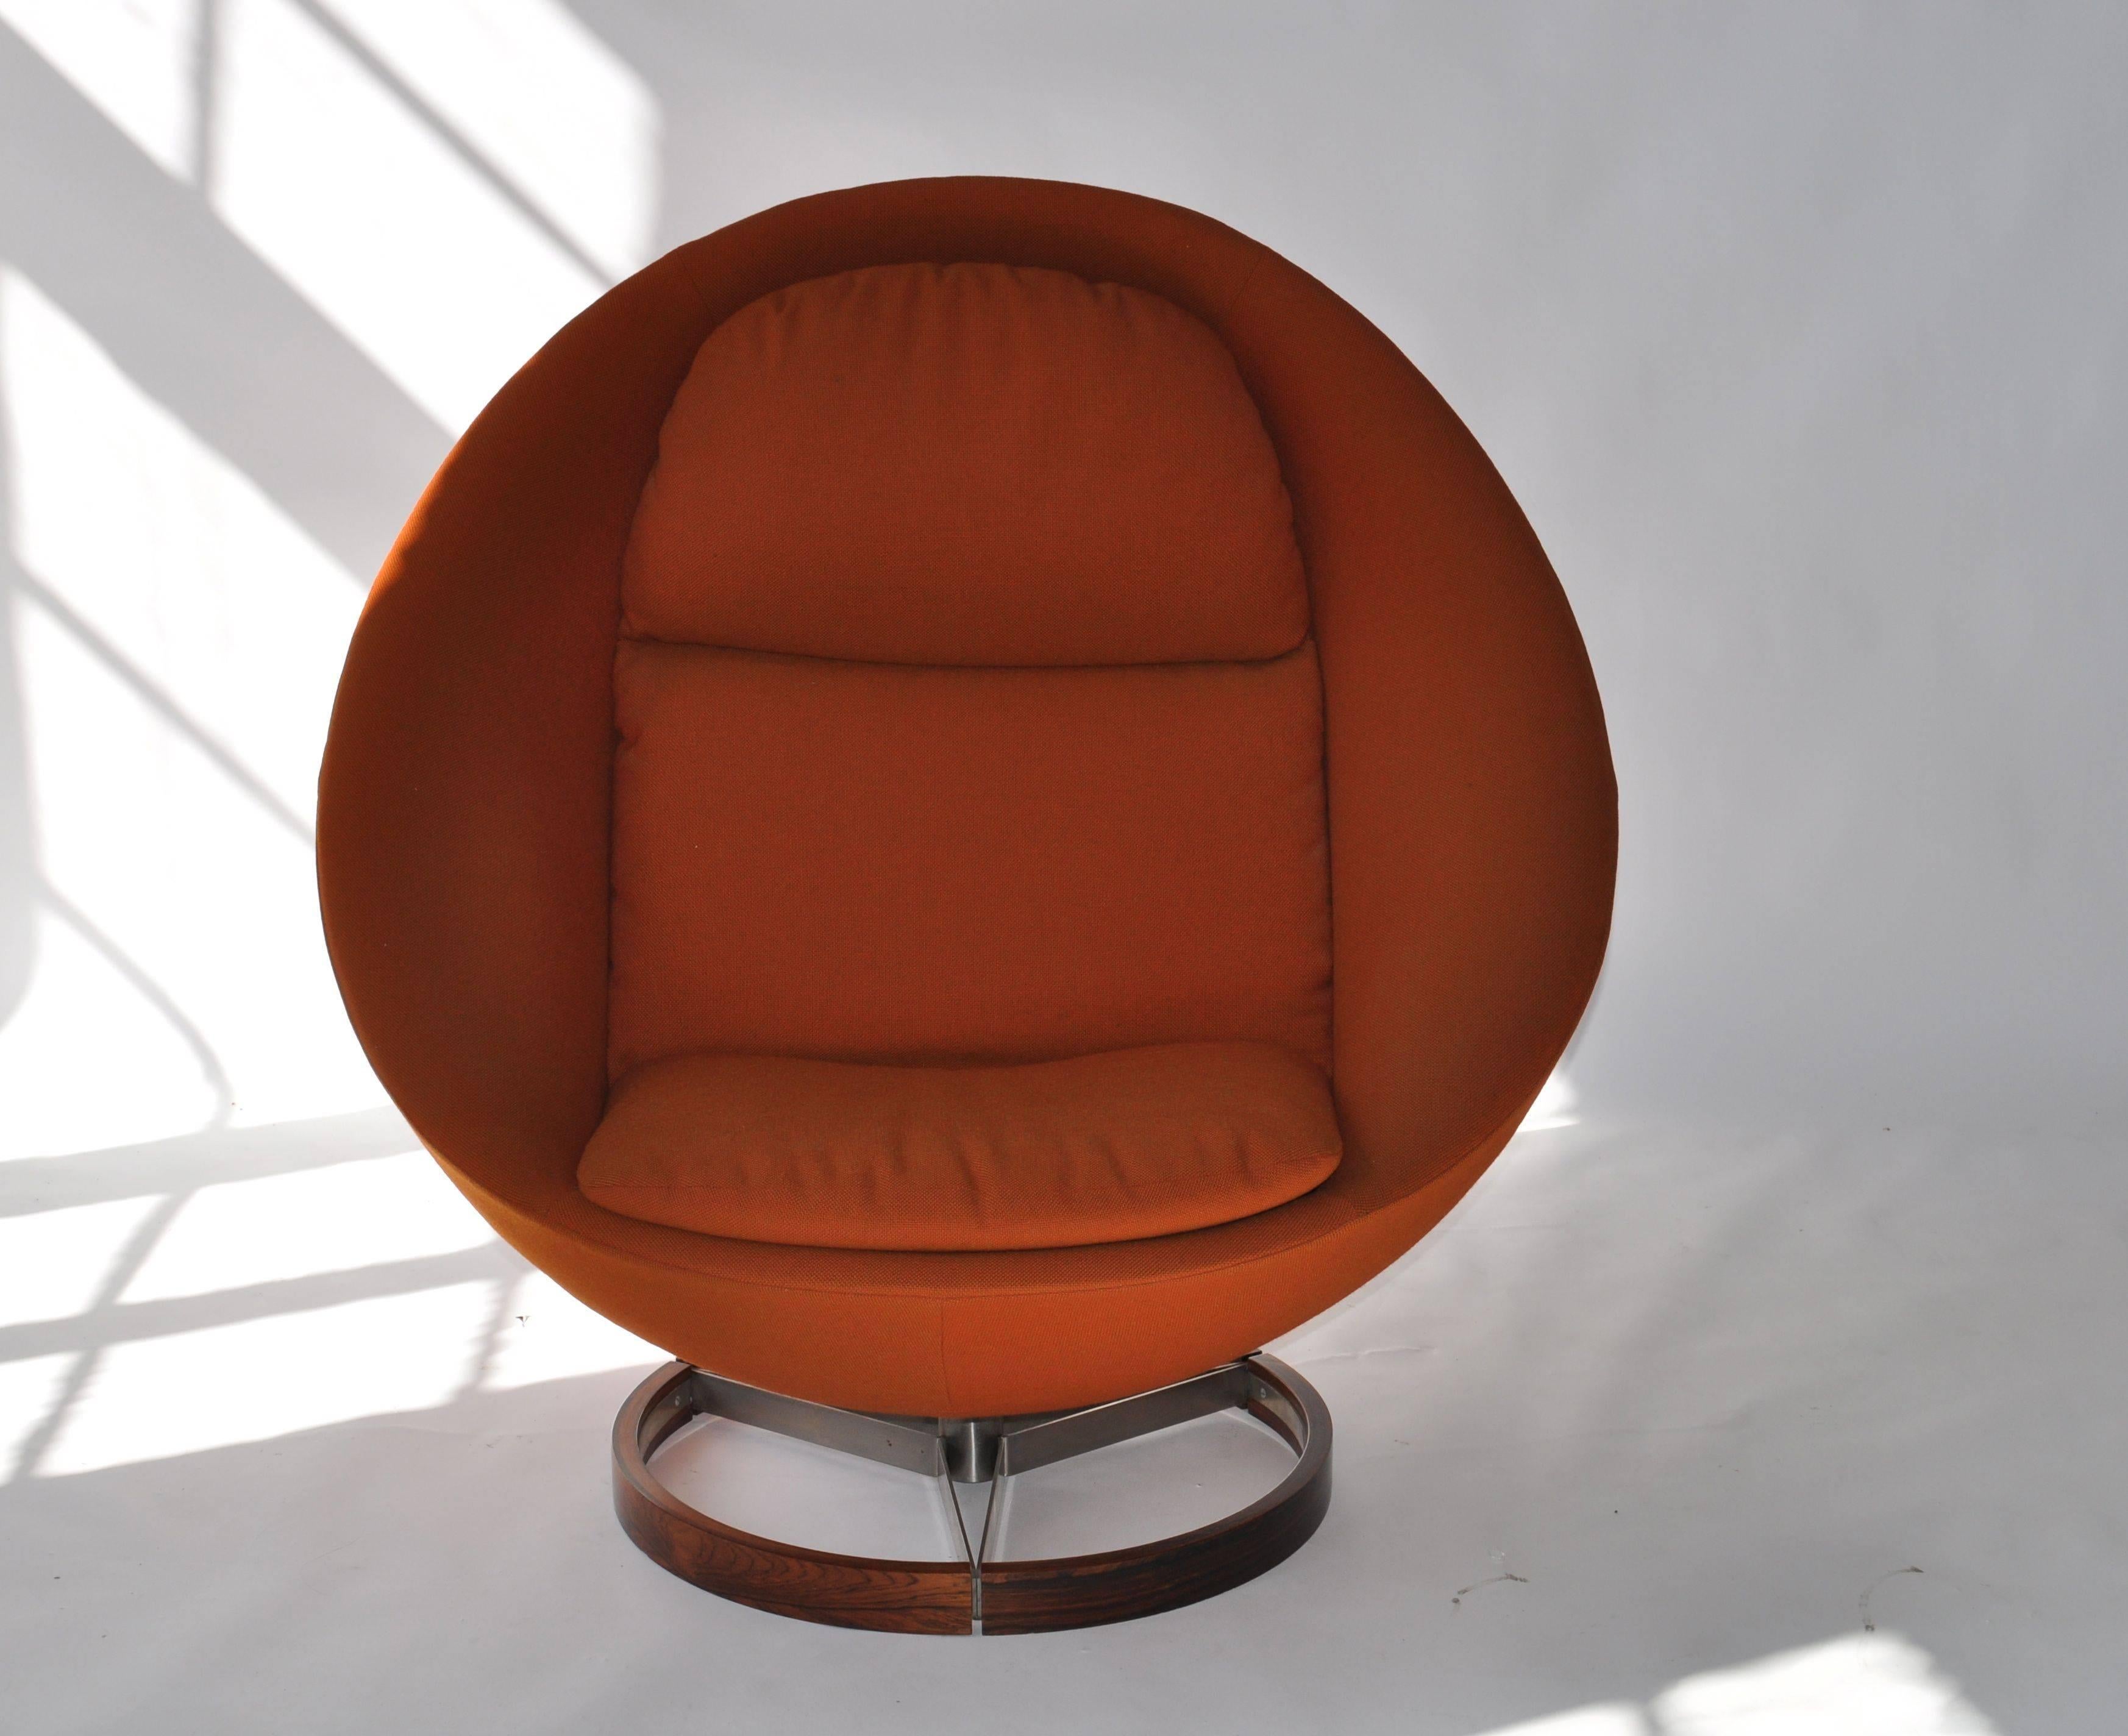 Unique large-scale swivel Scandinavian lounge chair made by Westnofa of Norway. Rosewood base.